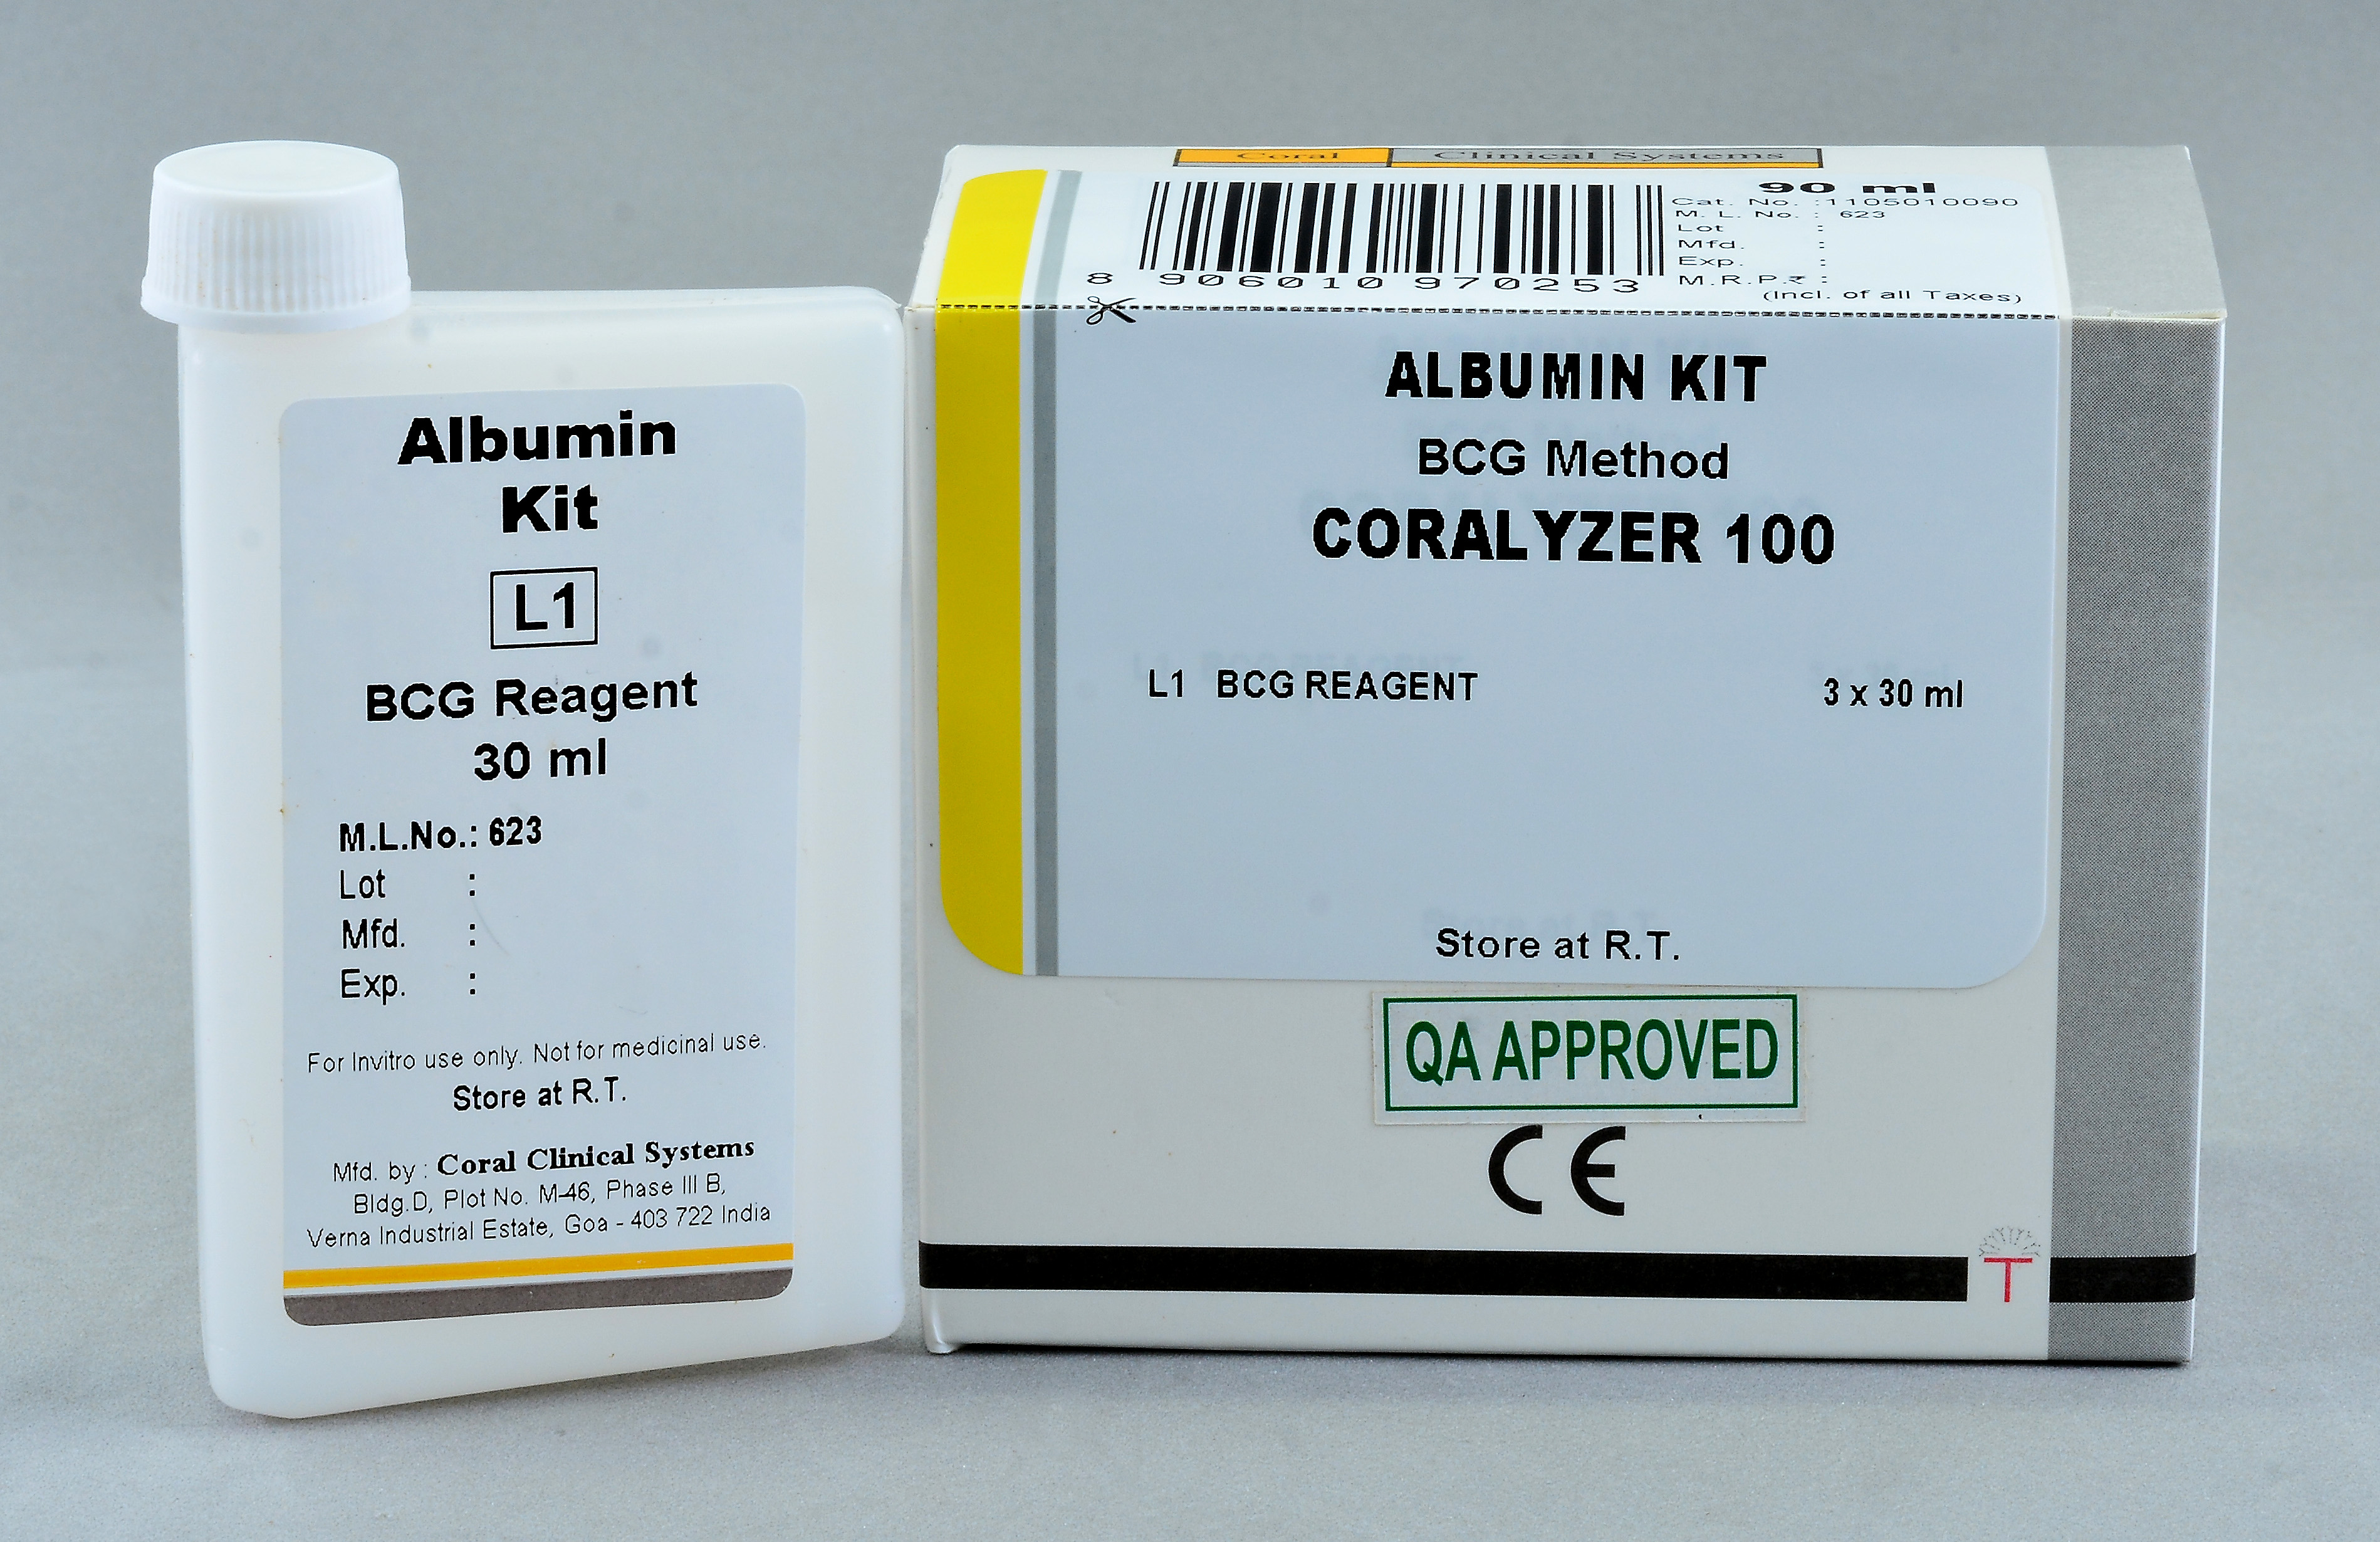 Coralyzer 100 System Pack Albumin